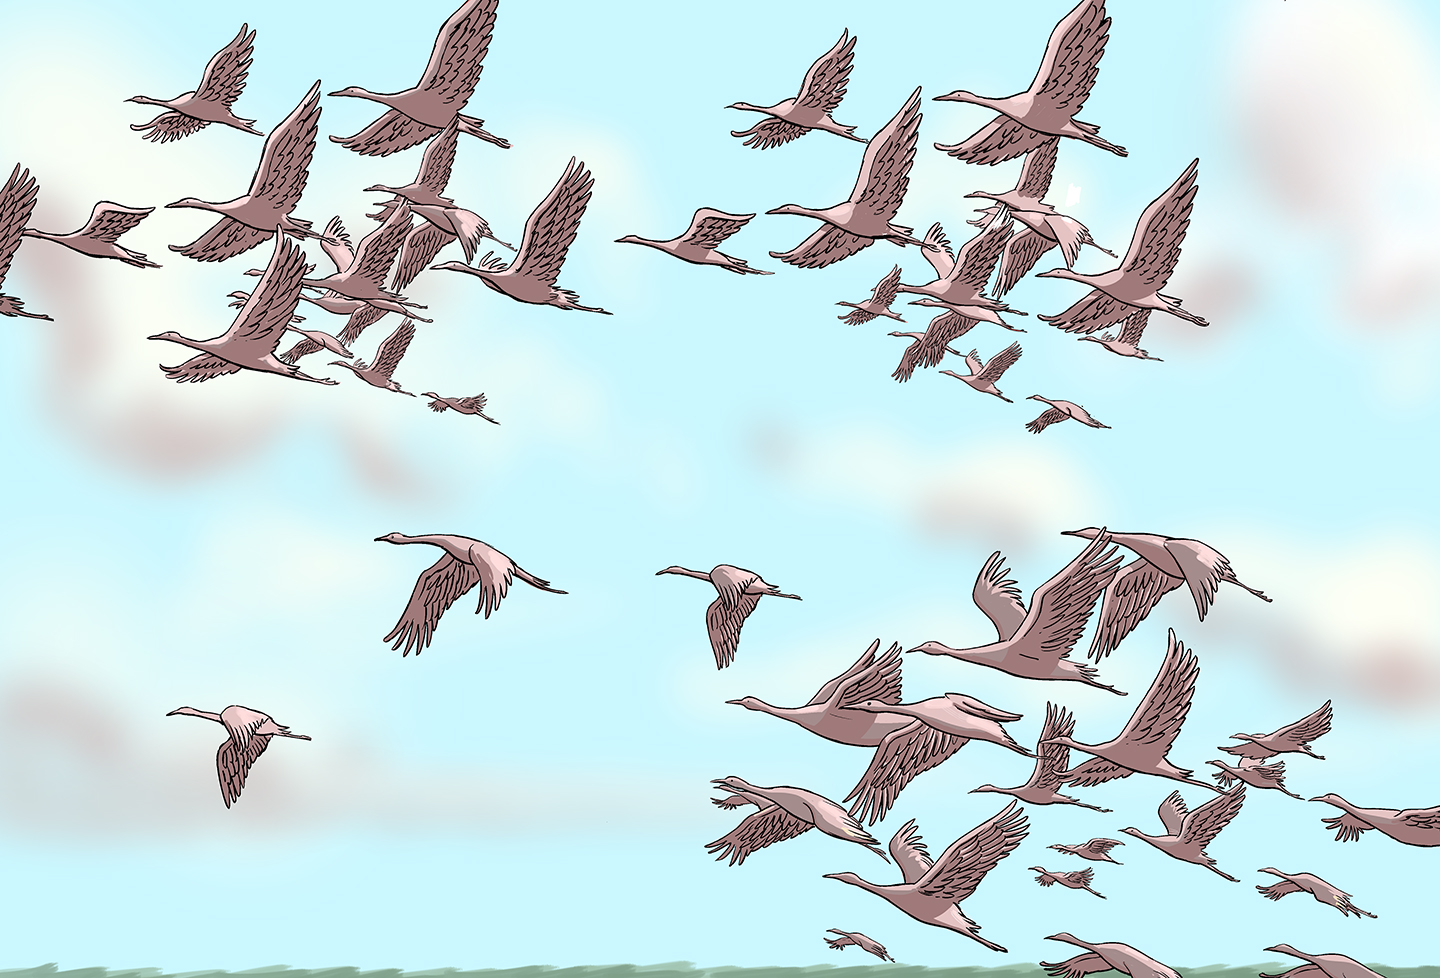 A sky full of cranes, this time grouped into three smaller flocks and several stragglers flying alone.